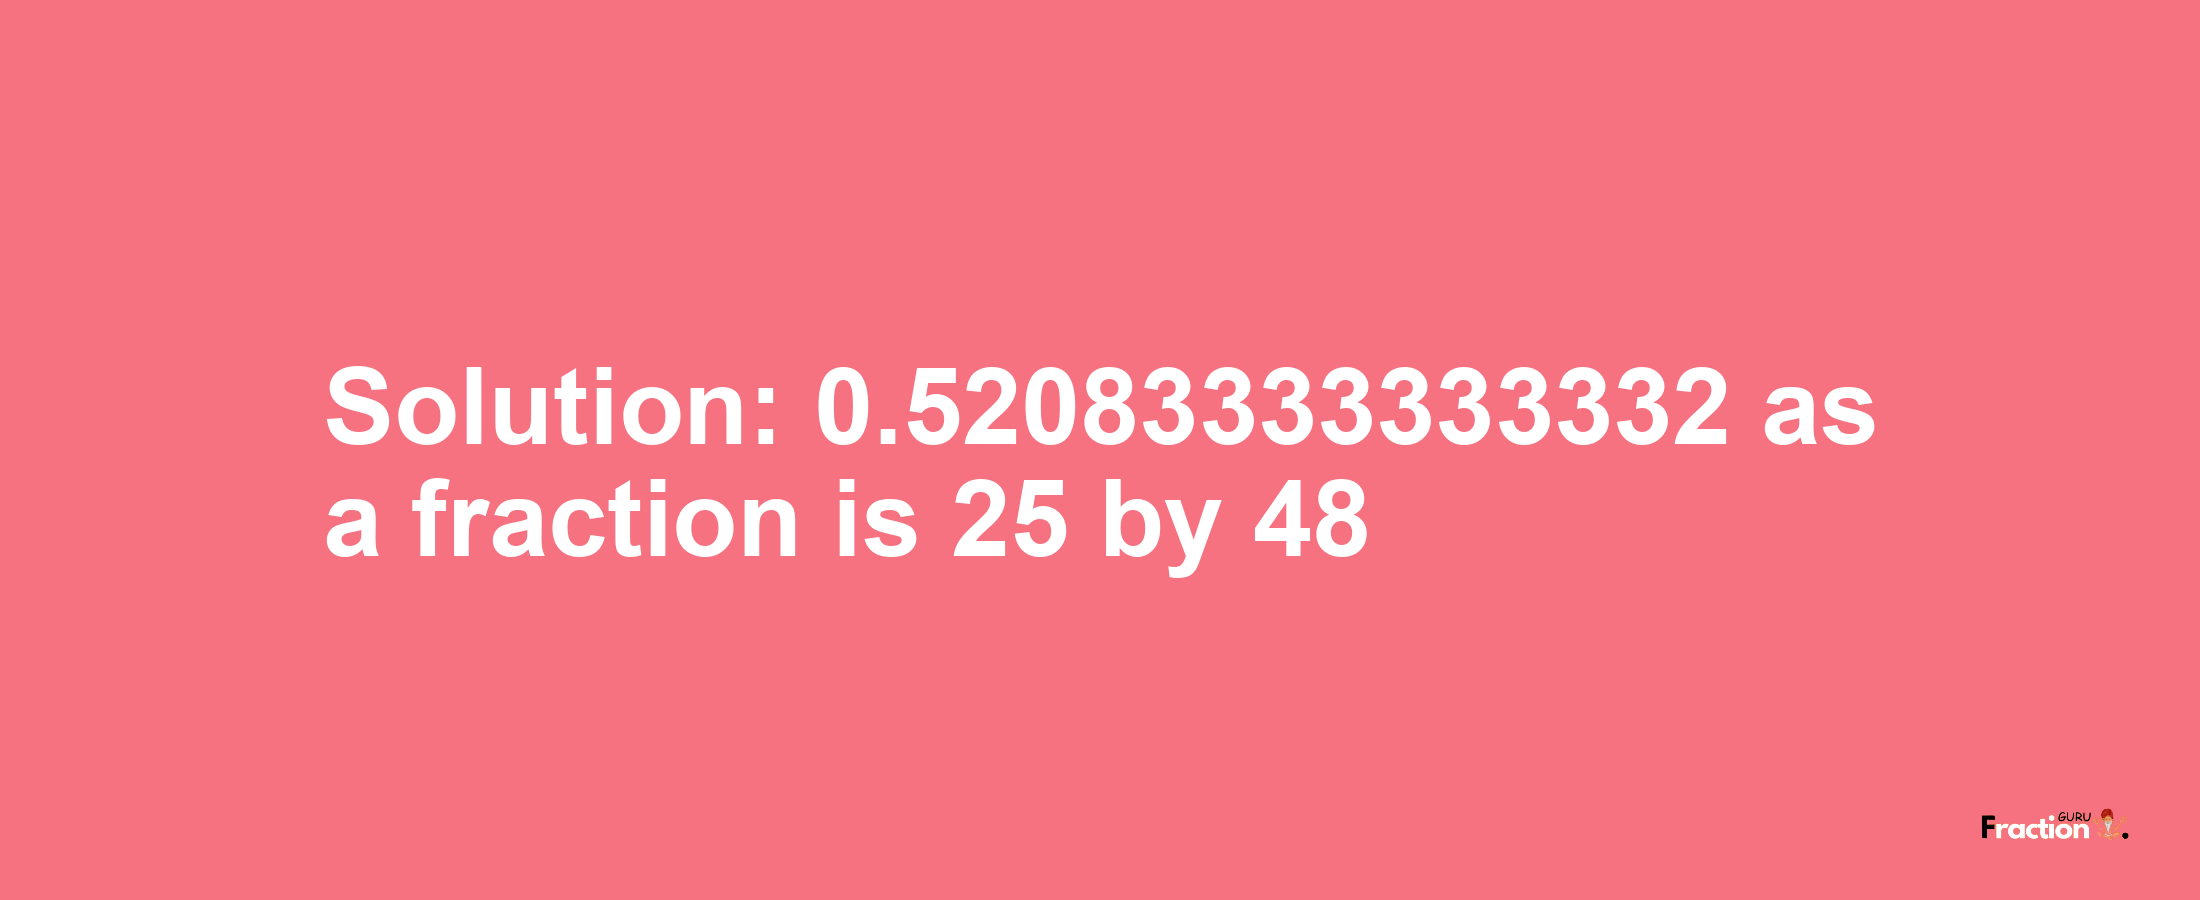 Solution:0.52083333333332 as a fraction is 25/48